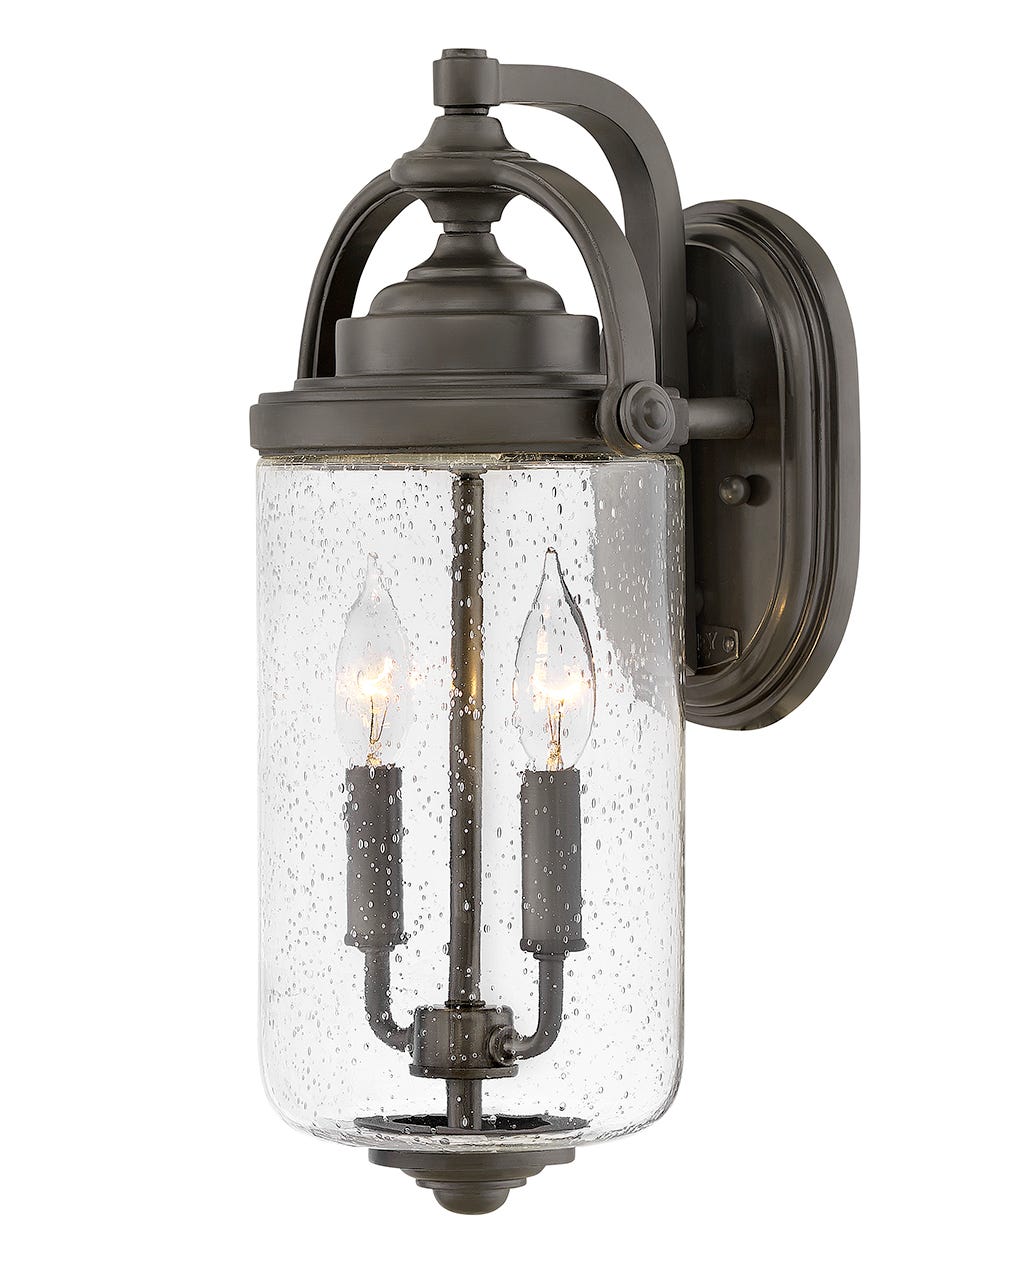 OUTDOOR WILLOUGHBY Wall Mount Lantern